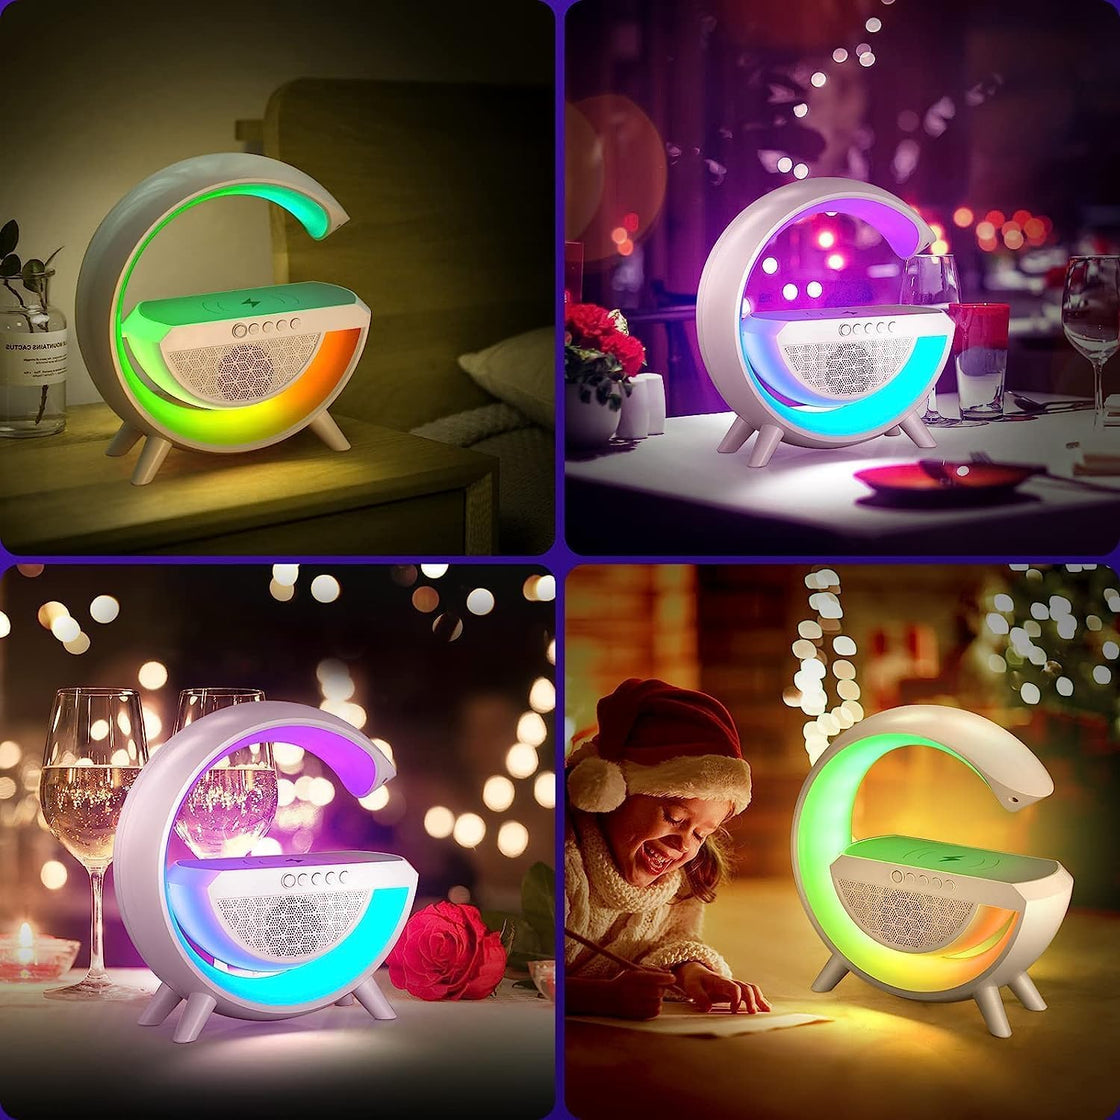 Transform Your Space with the G Speaker Lamp - APP Control 3 in 1 Multi-Function Bluetooth Speaker!